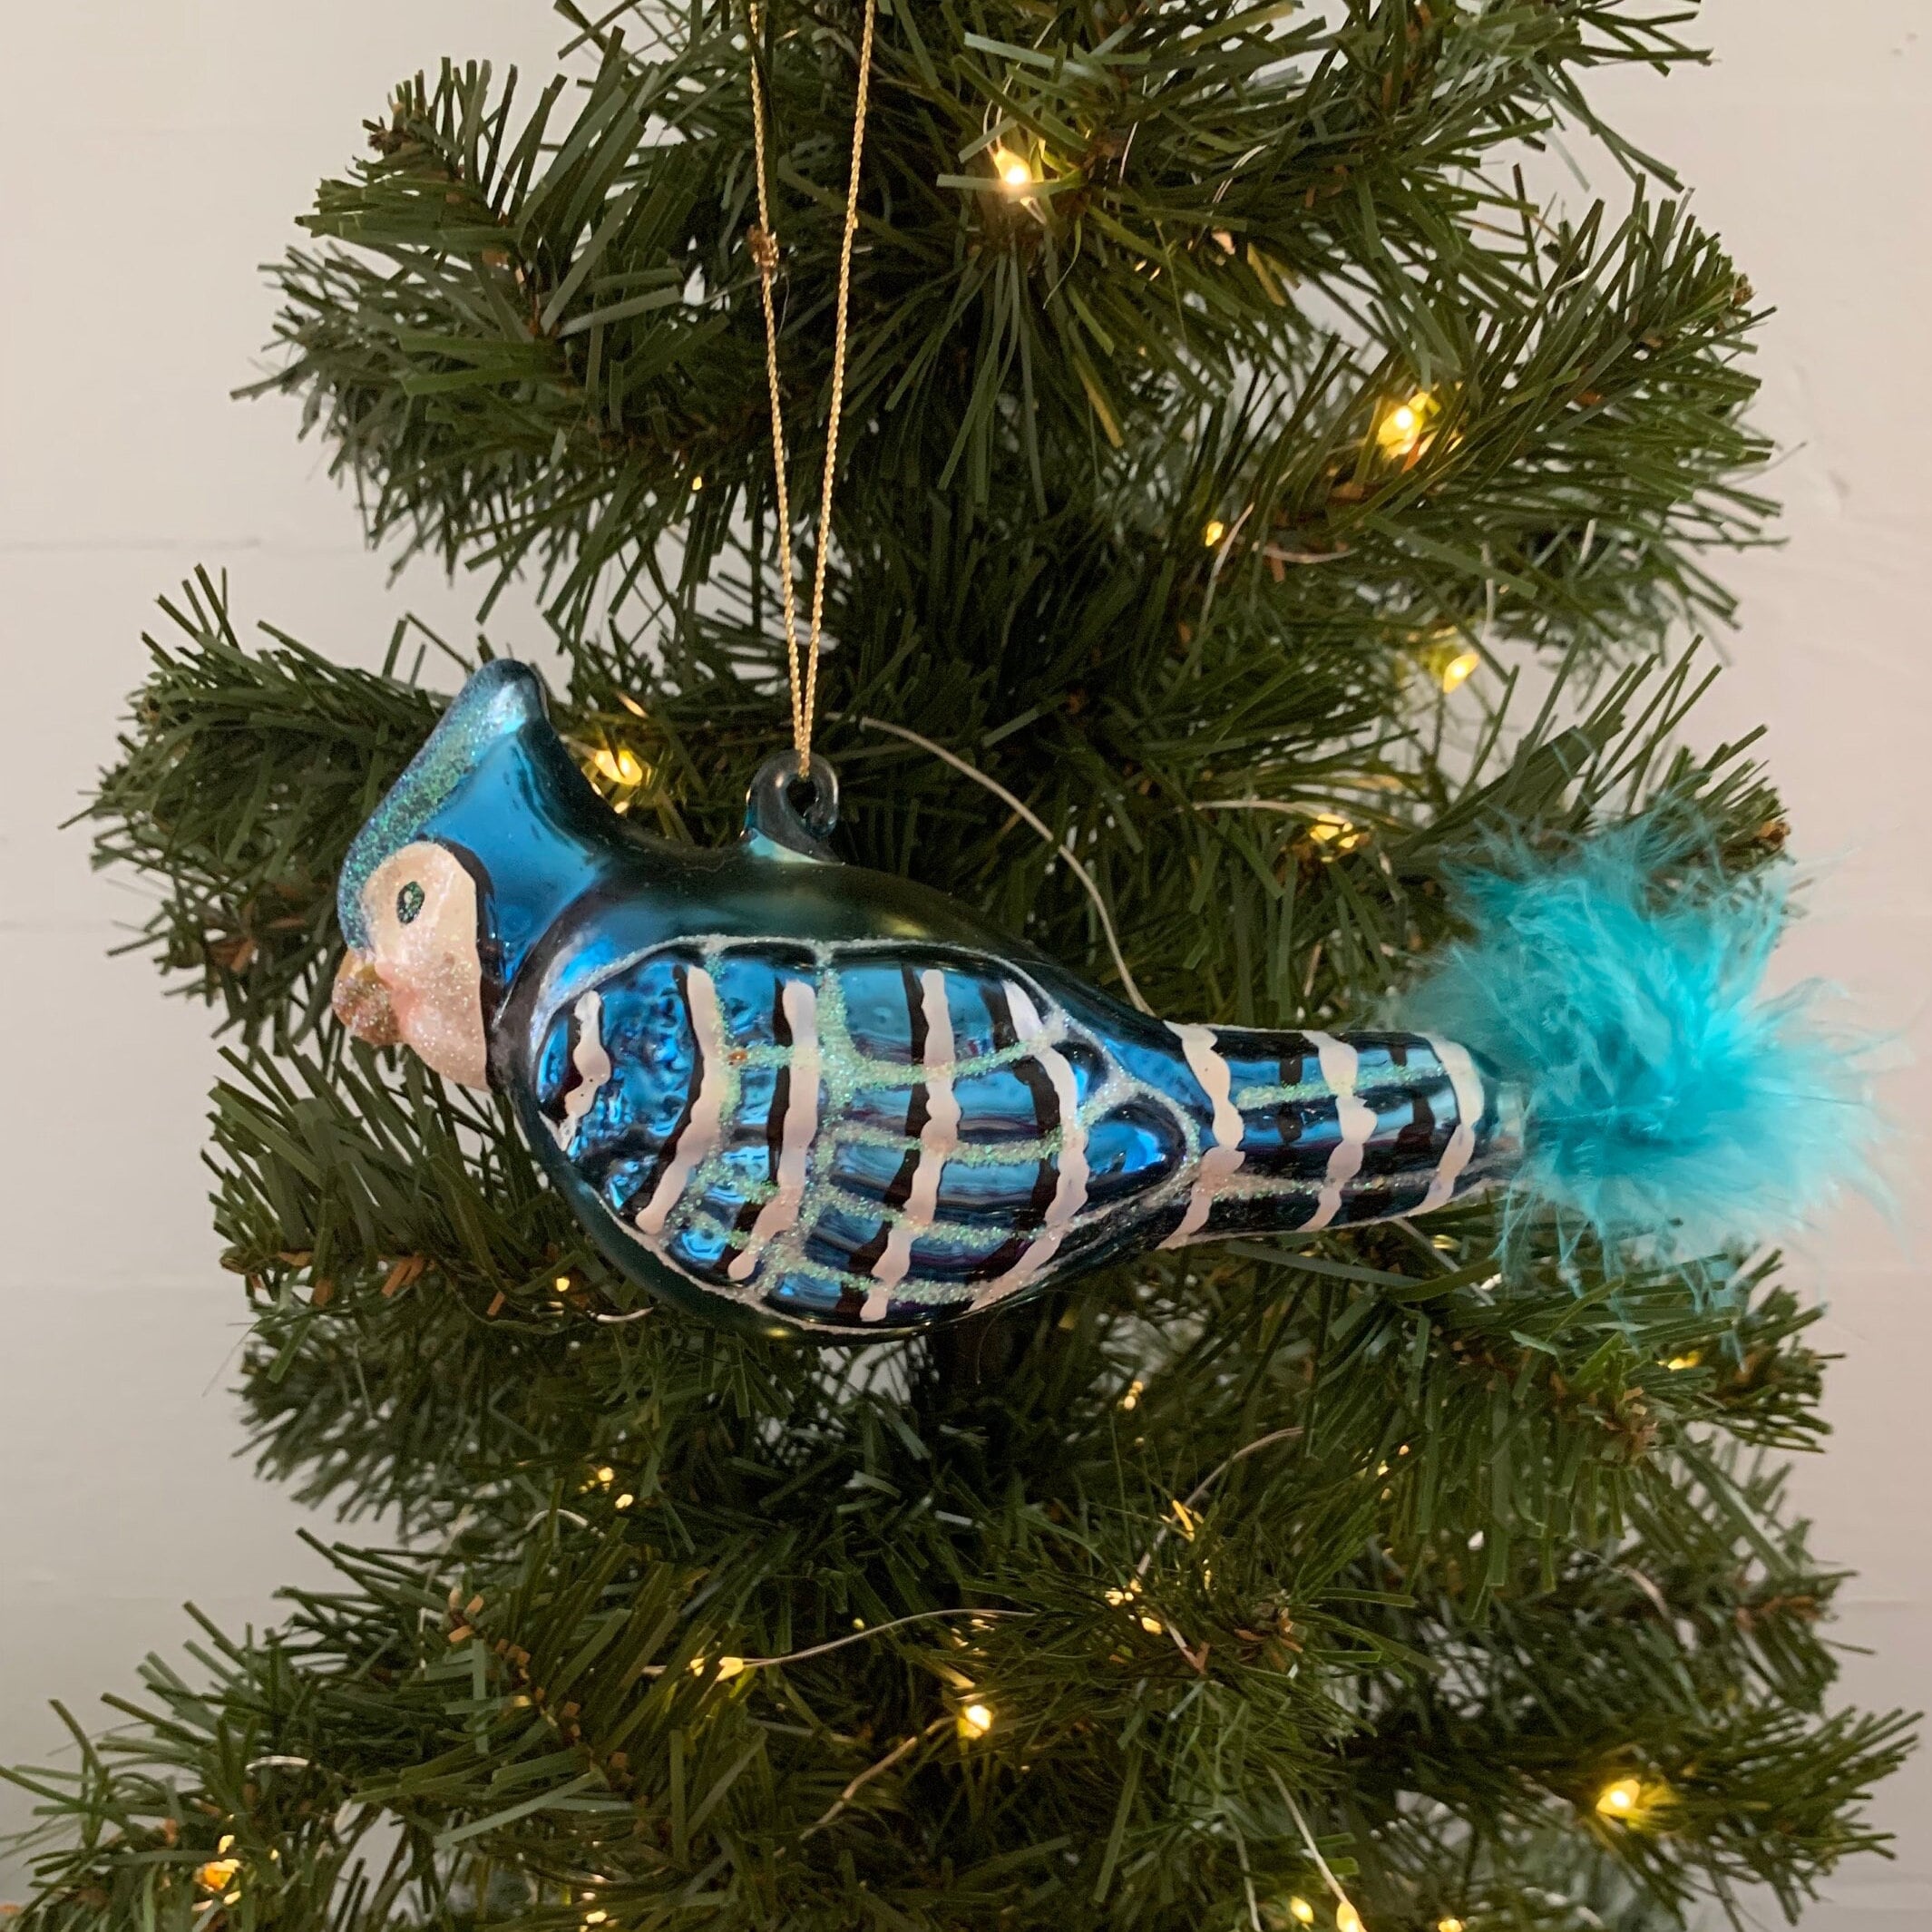 Faux Peacock Ornaments Glitter Blue Peacock Ornaments Artificial Peacock  Decor with Feather Tail and Clip for Christmas Tree (Blue, 2PCS)